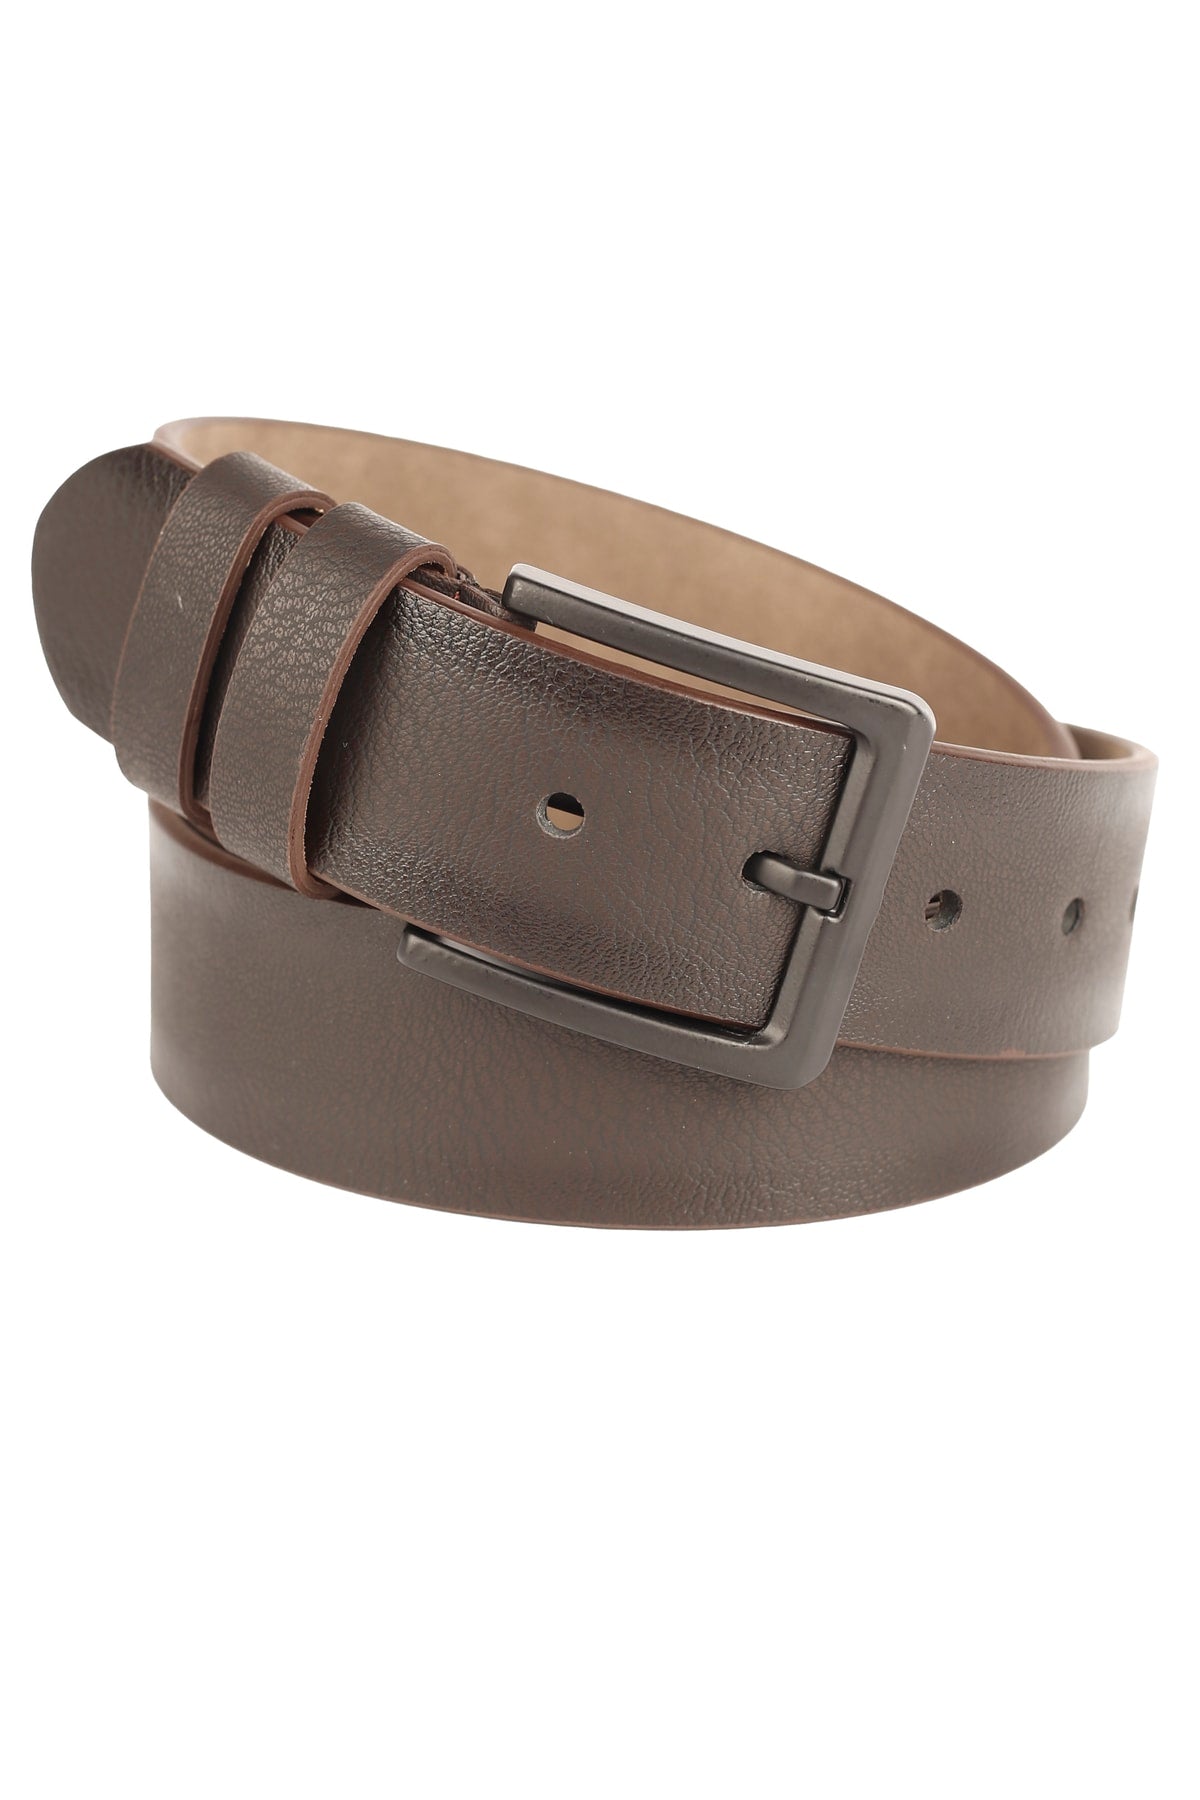 Sports Men's Belt Suitable For Jeans And Canvas